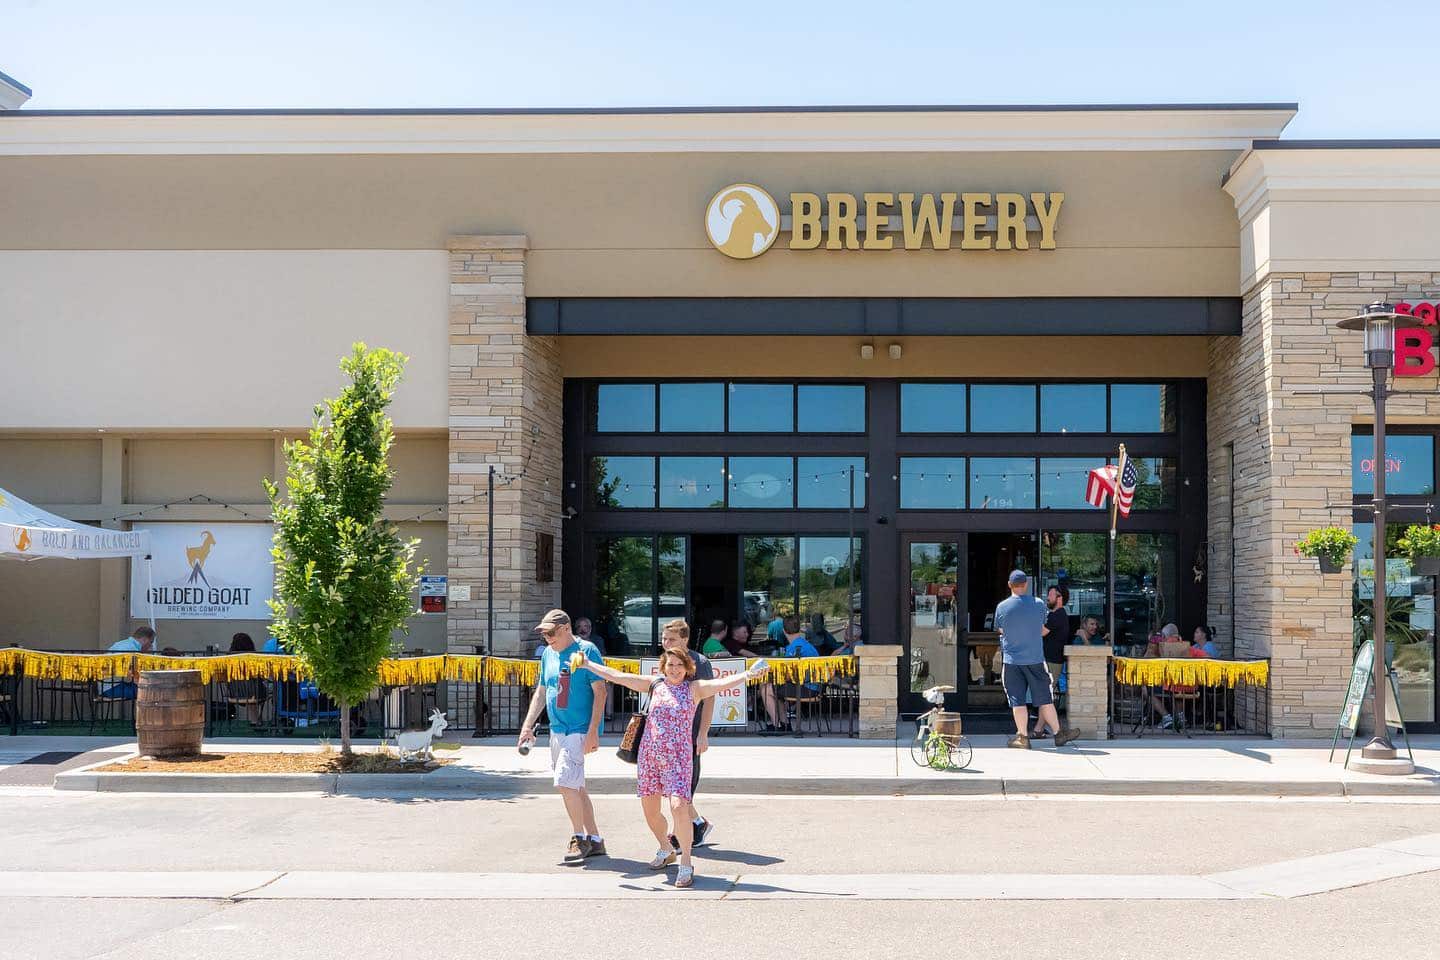 Image of the exterior of the Gilded Goat Brewing Company in Fort Collins, Colorado